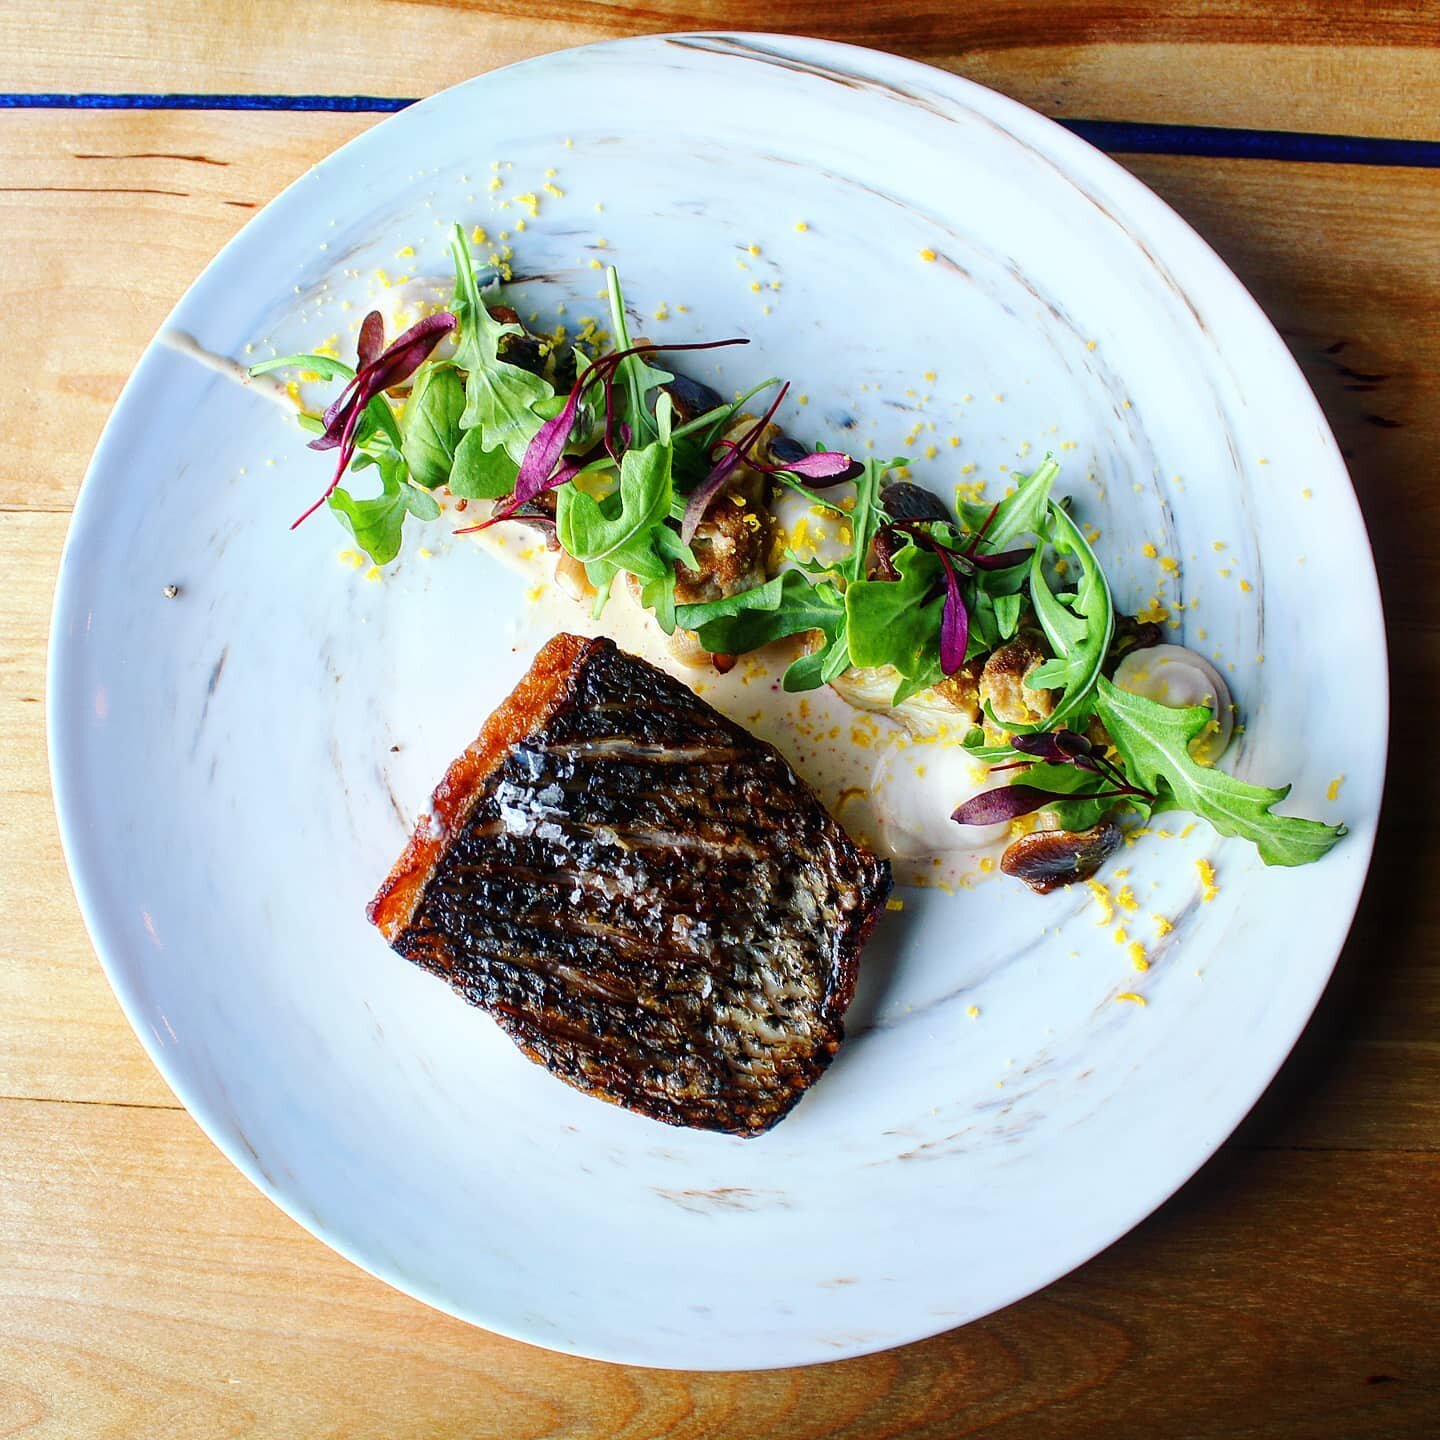 Striped sea bass with roasted mushrooms, white bean puree, arugula, saffron aioli, and cured egg yolk. We can't resist the 🐟 lately. Call soon to hook a reservation for the weekend.
.
.
.
.
.
.
.
.
.
.
.
.

#eatlocal #farmtotable #eatmaine #travelma